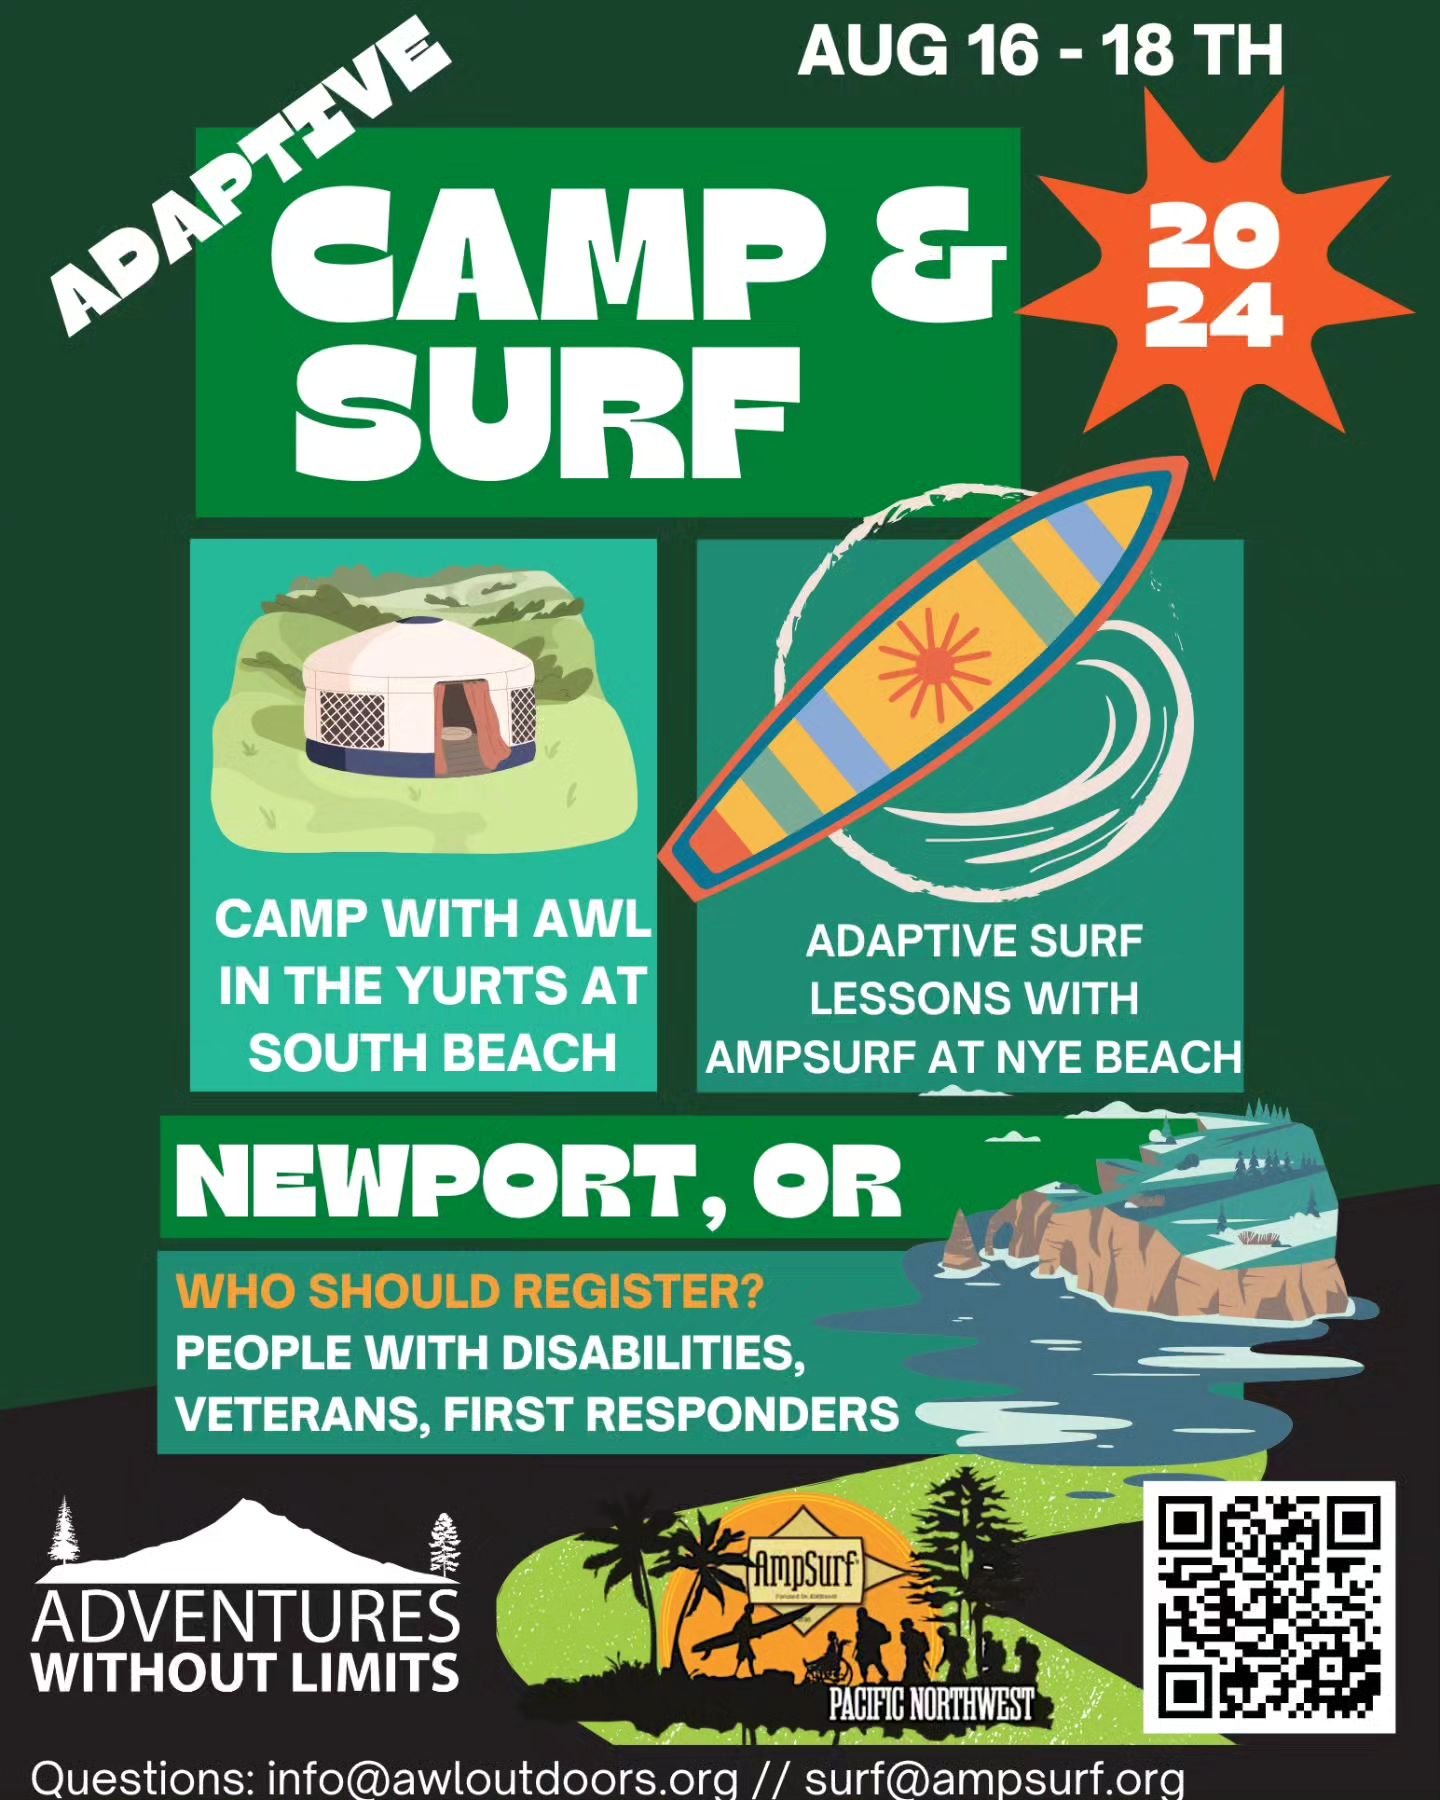 Join AWL and @ampsurf_us for a weekend of camping and adaptive surfing at the Oregon Coast this August! Spaces are limited, but people with disabilities, Veterans, and First Responders are encouraged to sign up today!

Visit https://awloutdoors.org/a